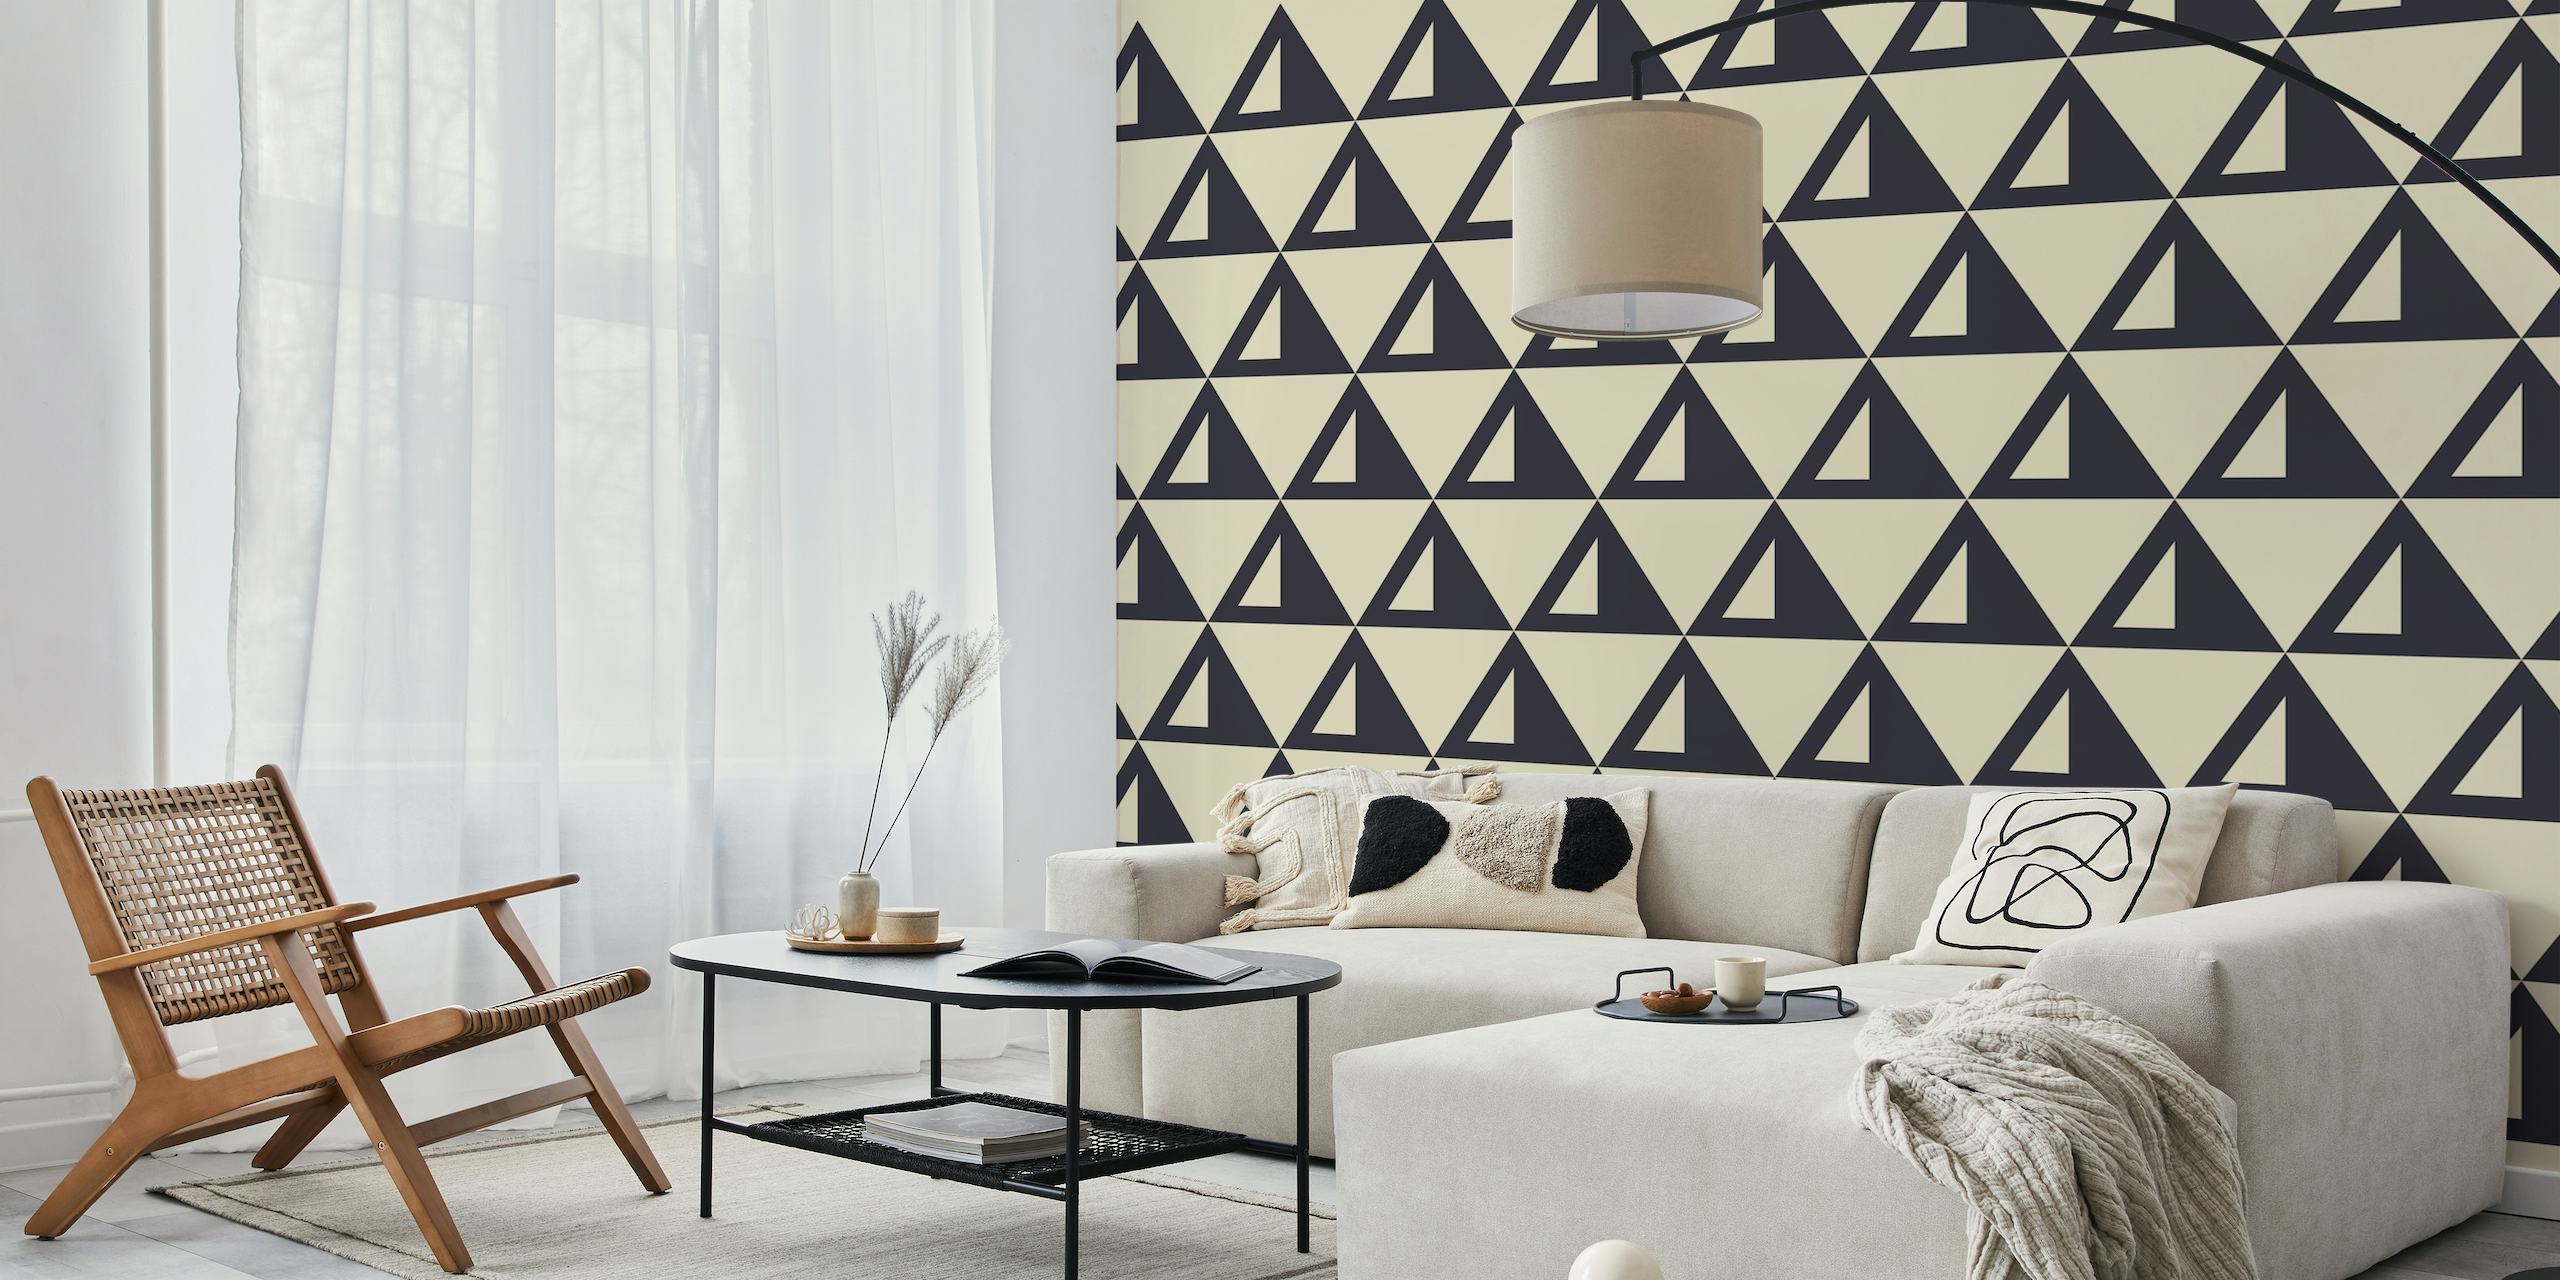 Black triangle pattern on wall mural for modern interiors